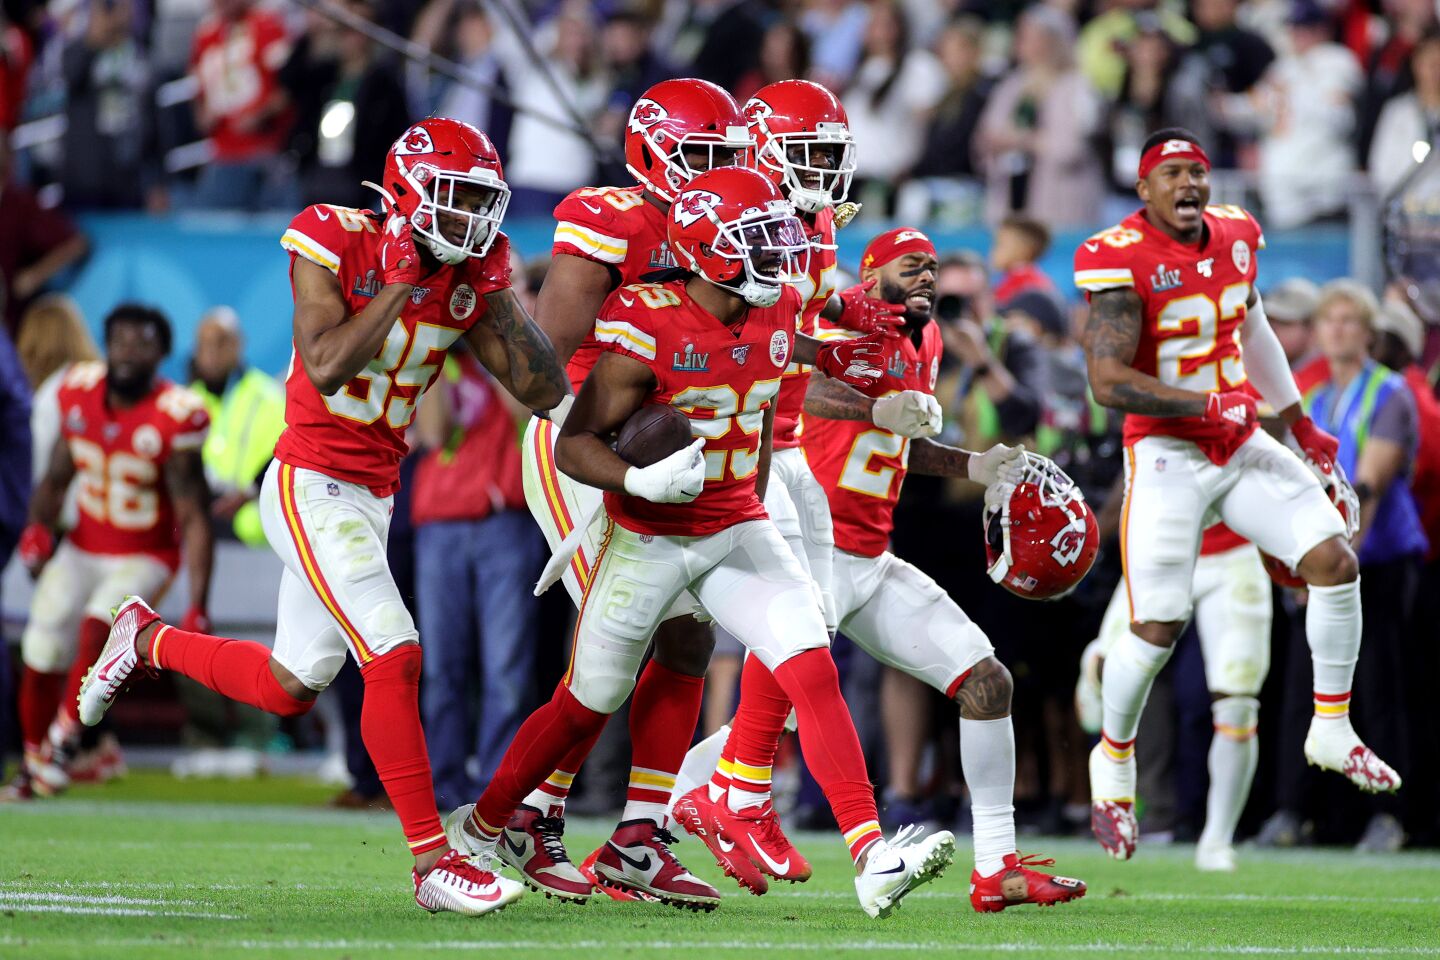 Kansas City Chiefs cornerback Kendall Fuller celebrates his interception in the final minute against the San Francisco 49ers in Super Bowl LIV.